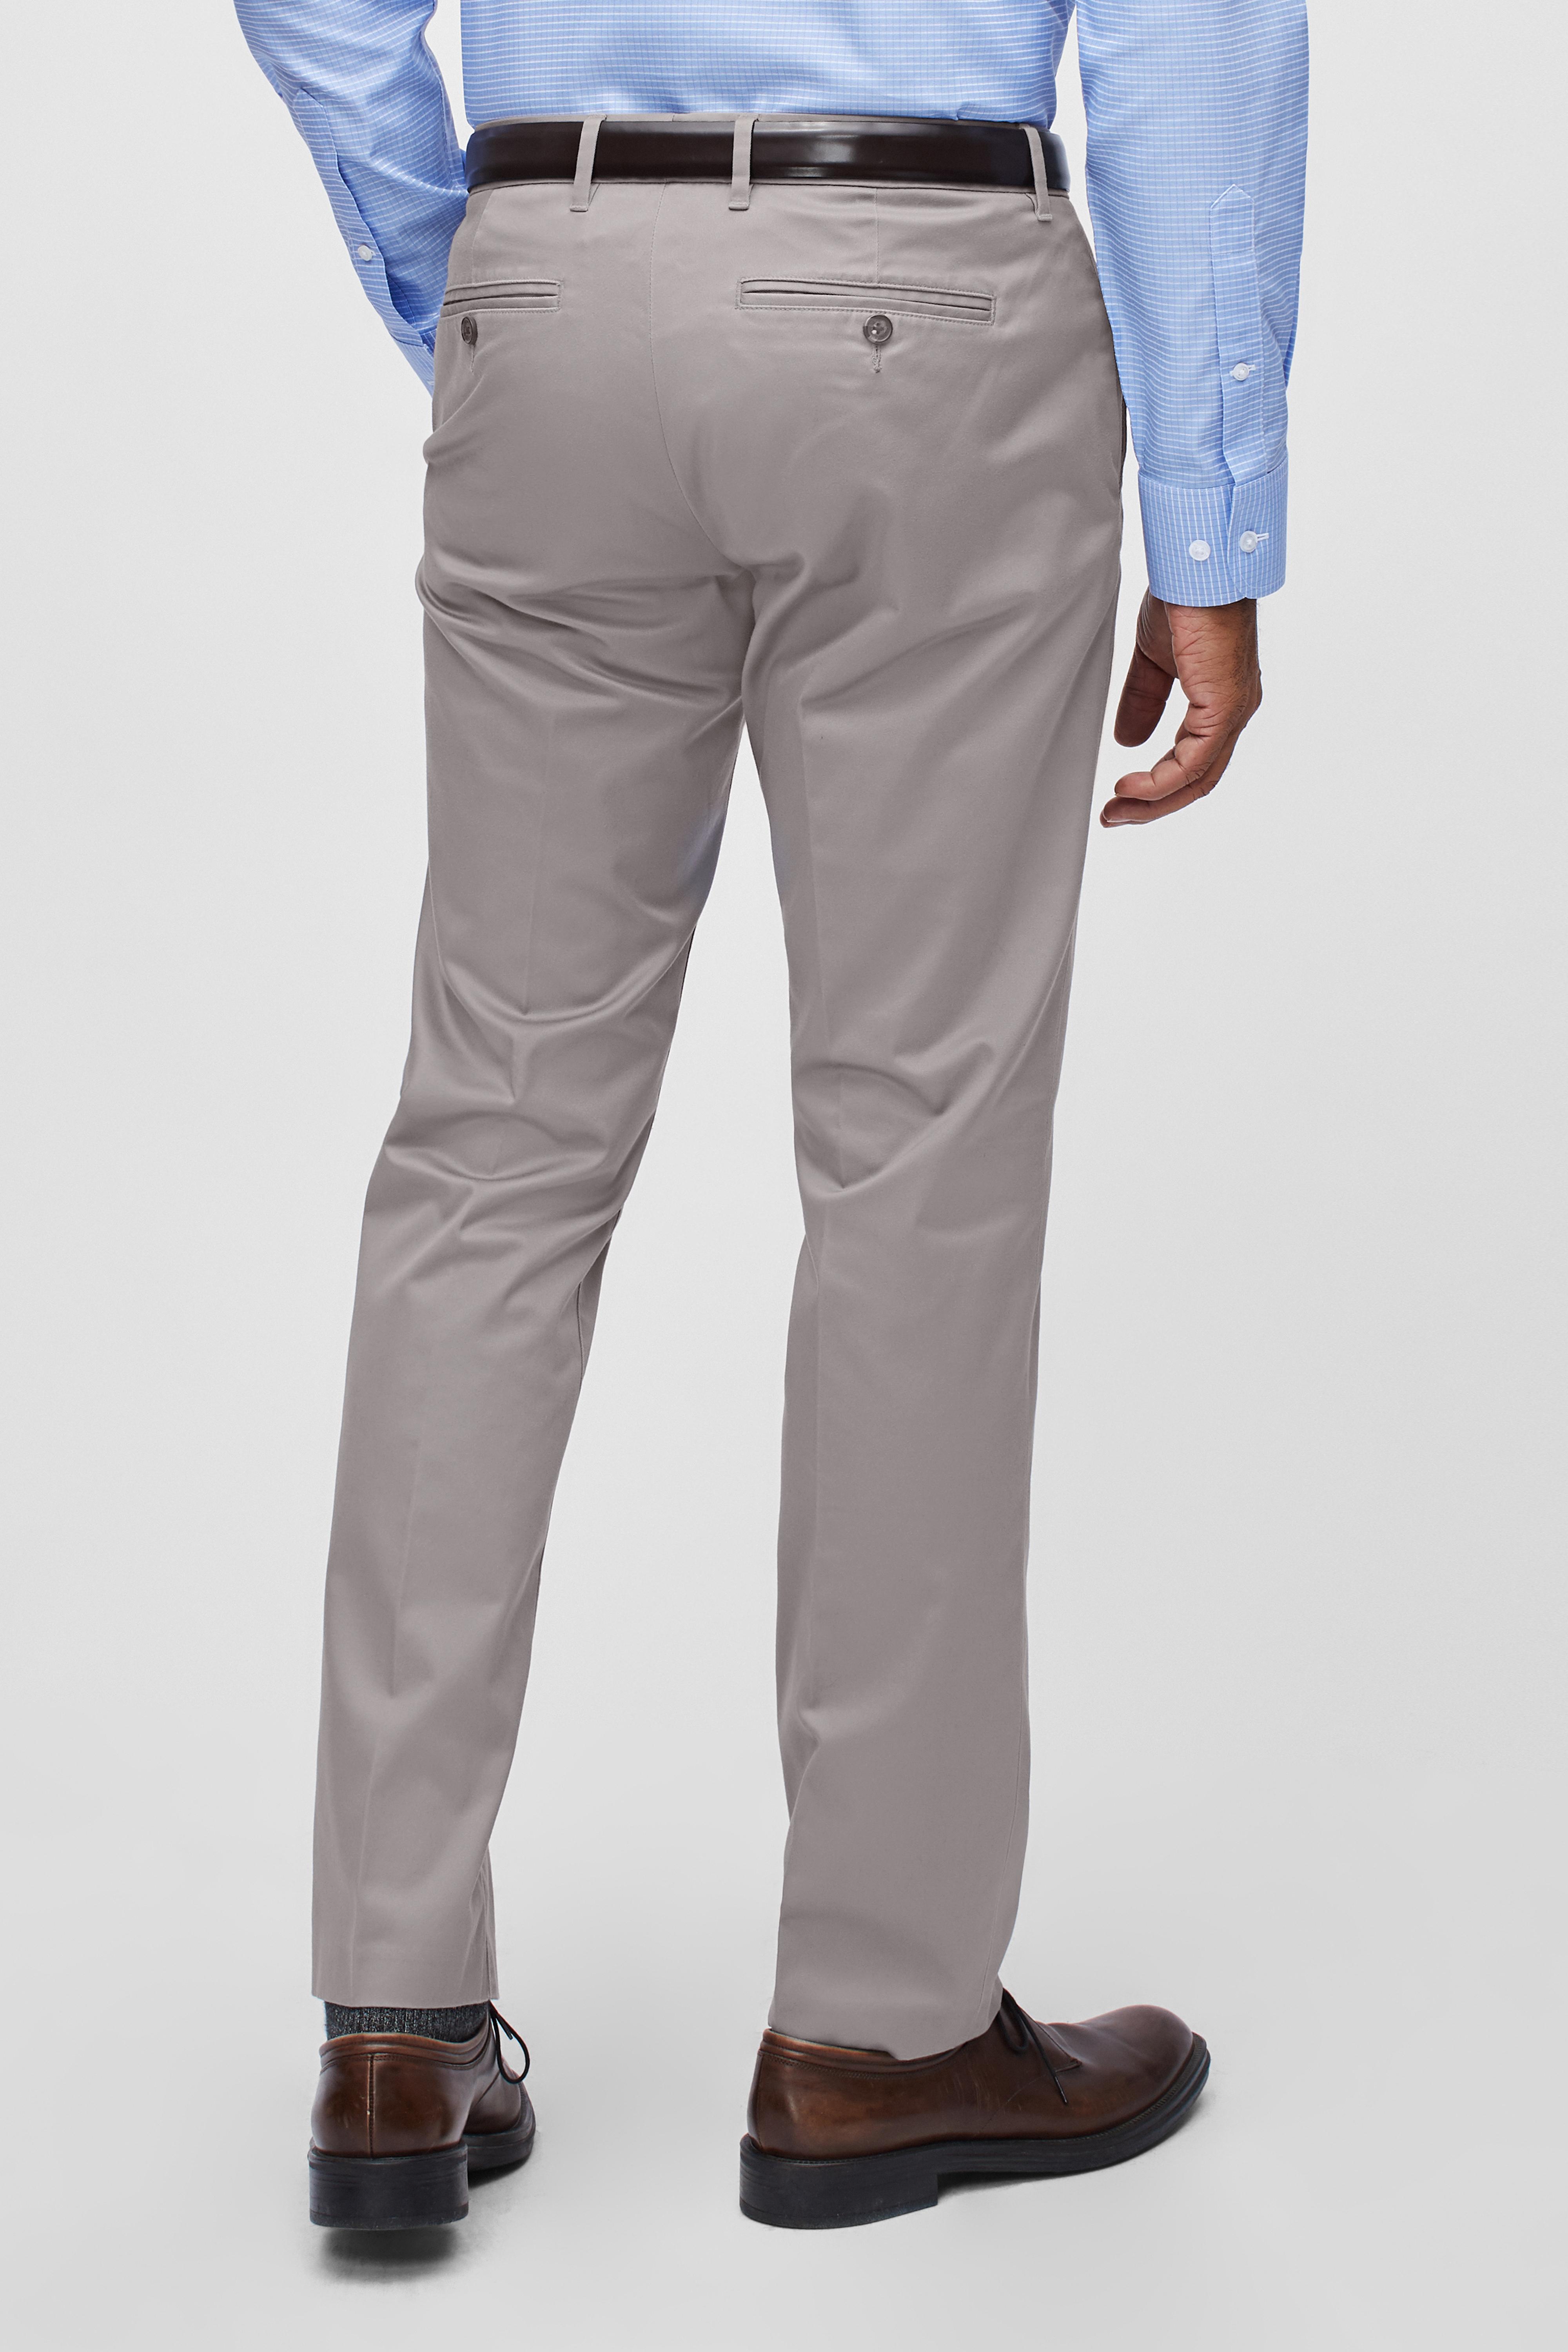 Bonobos Cotton Stretch Weekday Warrior Dress Pants in Gray for Men - Lyst